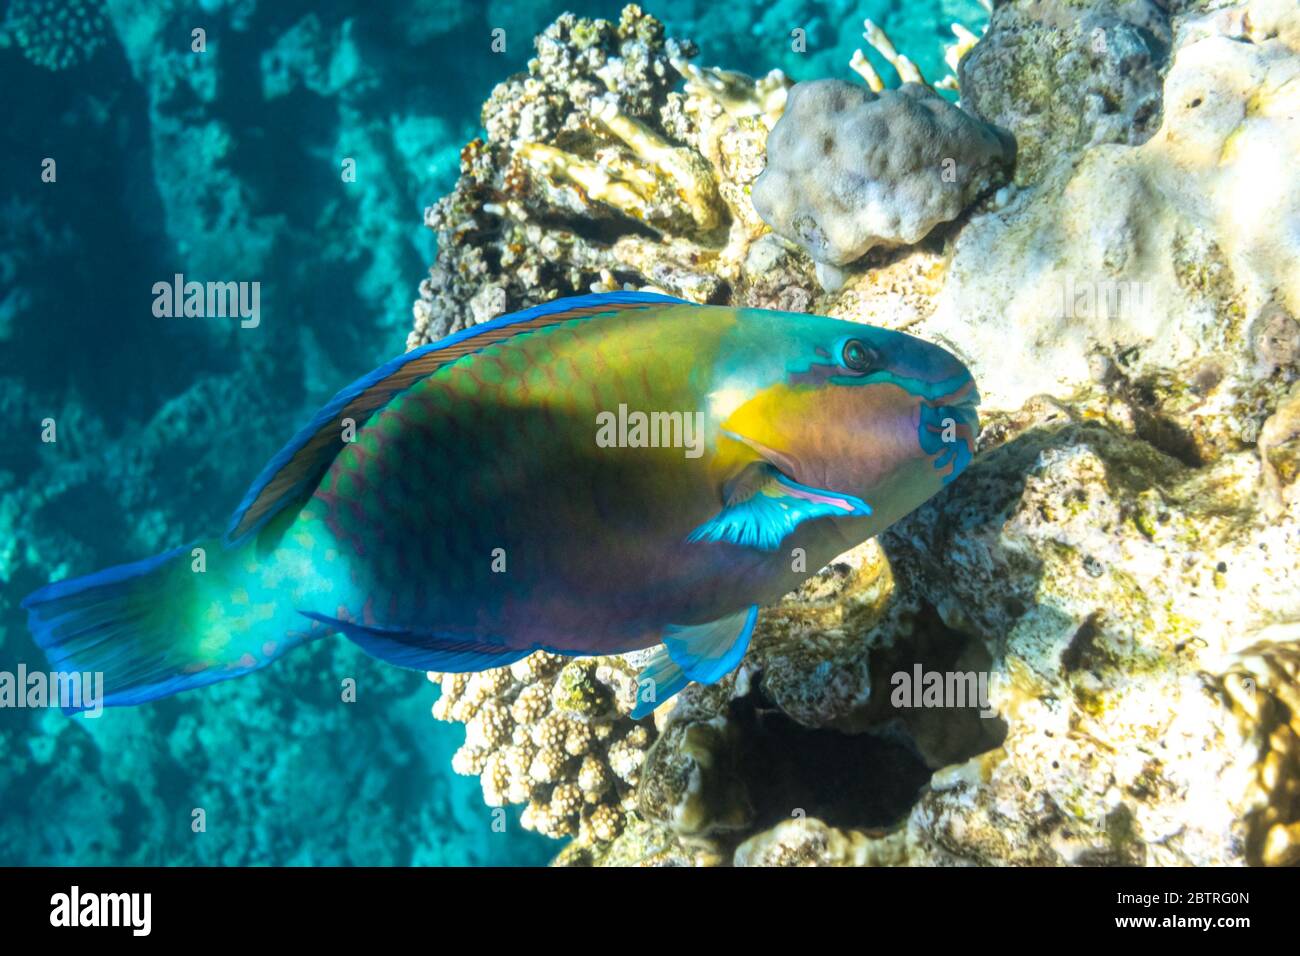 Rusty parrotfish (Scarus ferrugineus) in Red Sea, Egypt. Bright tropical coral fish, close up, side view. Stock Photo